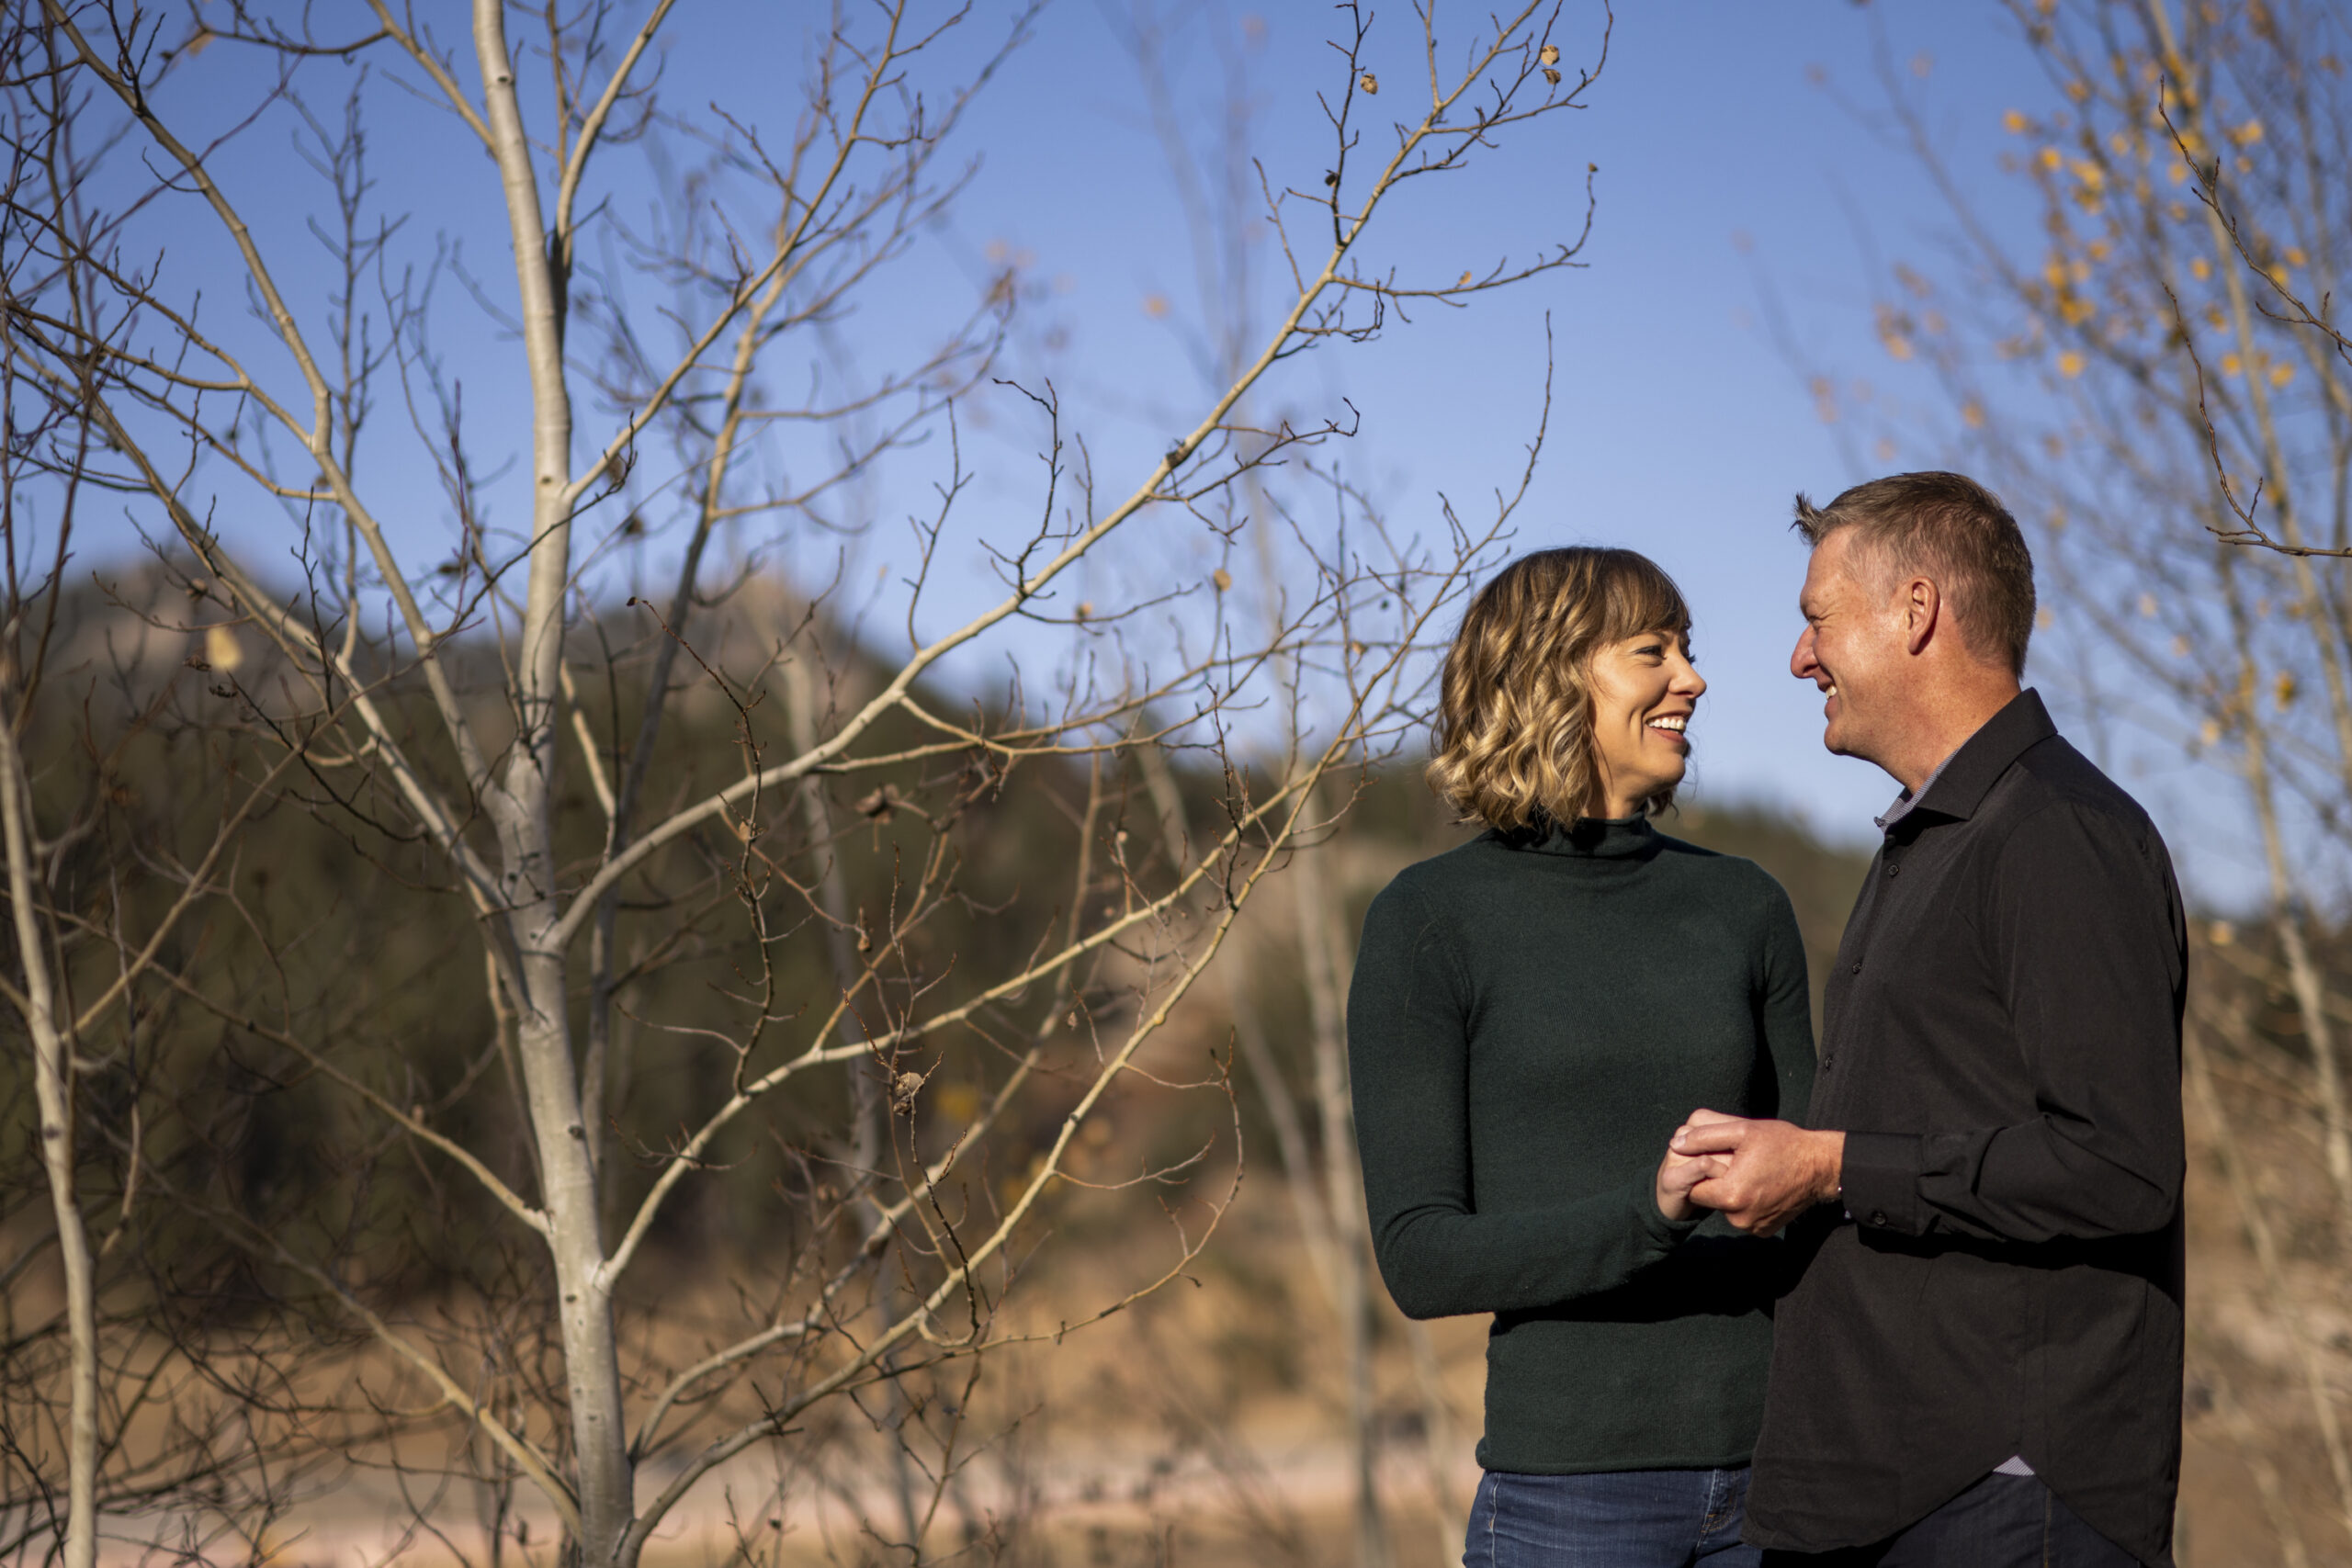 A smiling woman in a green turtleneck faces a man in a black-collared shirt smiling and surrounded by trees during an engagement session at Meyer Ranch Park in Colorado.